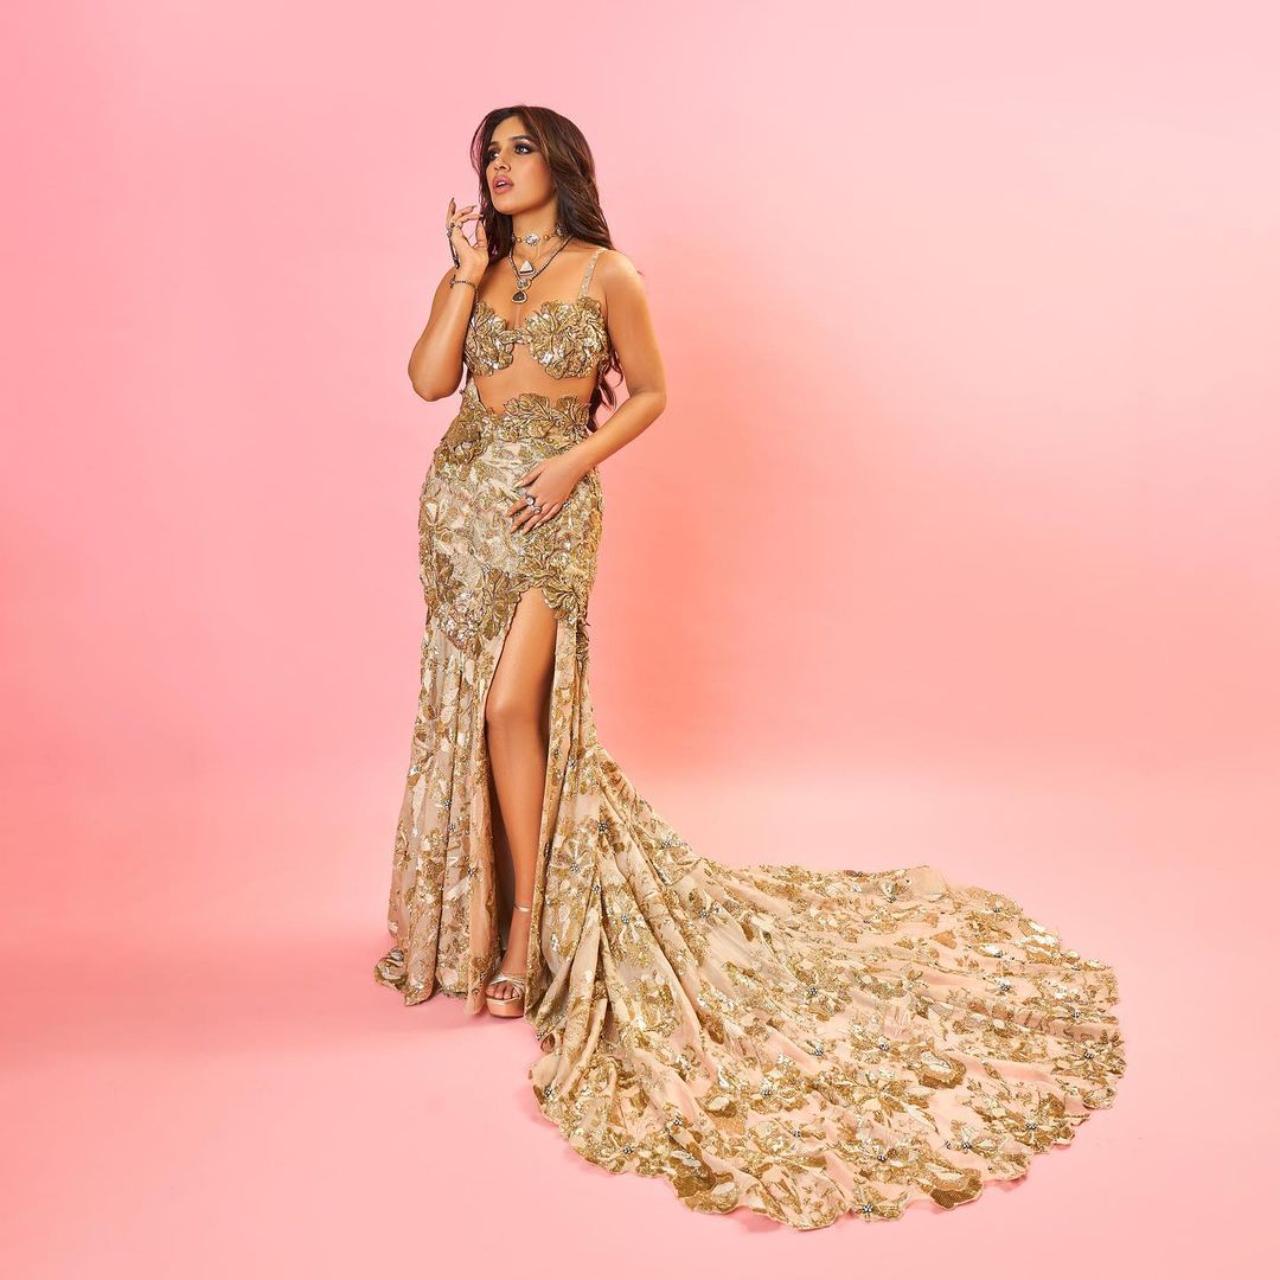 Bhumi Pednekar turned showstopper and was styled in a stunning embroidered fishtail lehenga with 3D flowers, a signature element of the 'Inner Bloom' collection. Pednekar's makeup comprised smoky eyes, contoured cheeks and minimal blush, accentuating her refined, whimsical look